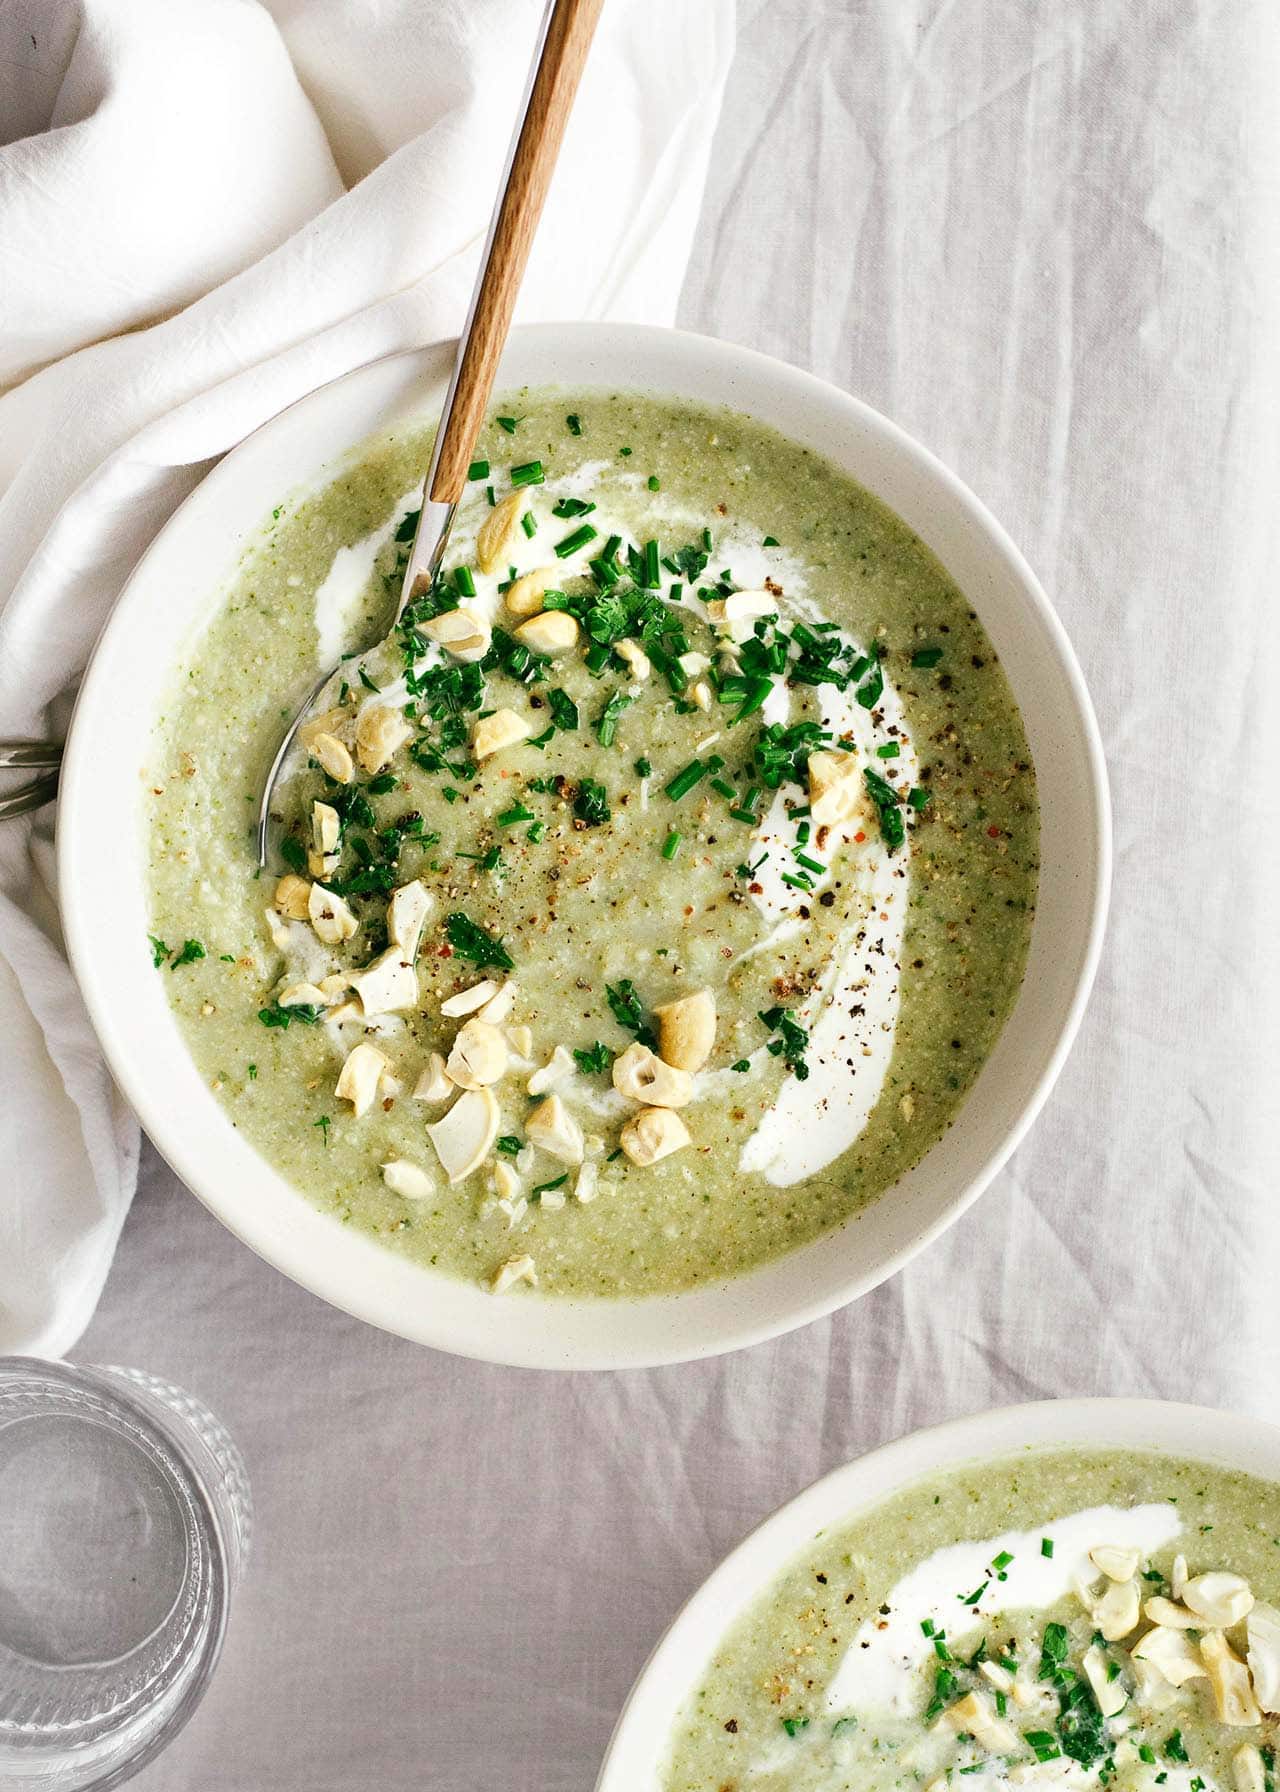 https://camillestyles.com/wp-content/uploads/2020/11/ee925b82-winter-green-soup-broccoli-cauliflower-brussels-sprouts-soup-0012.jpg